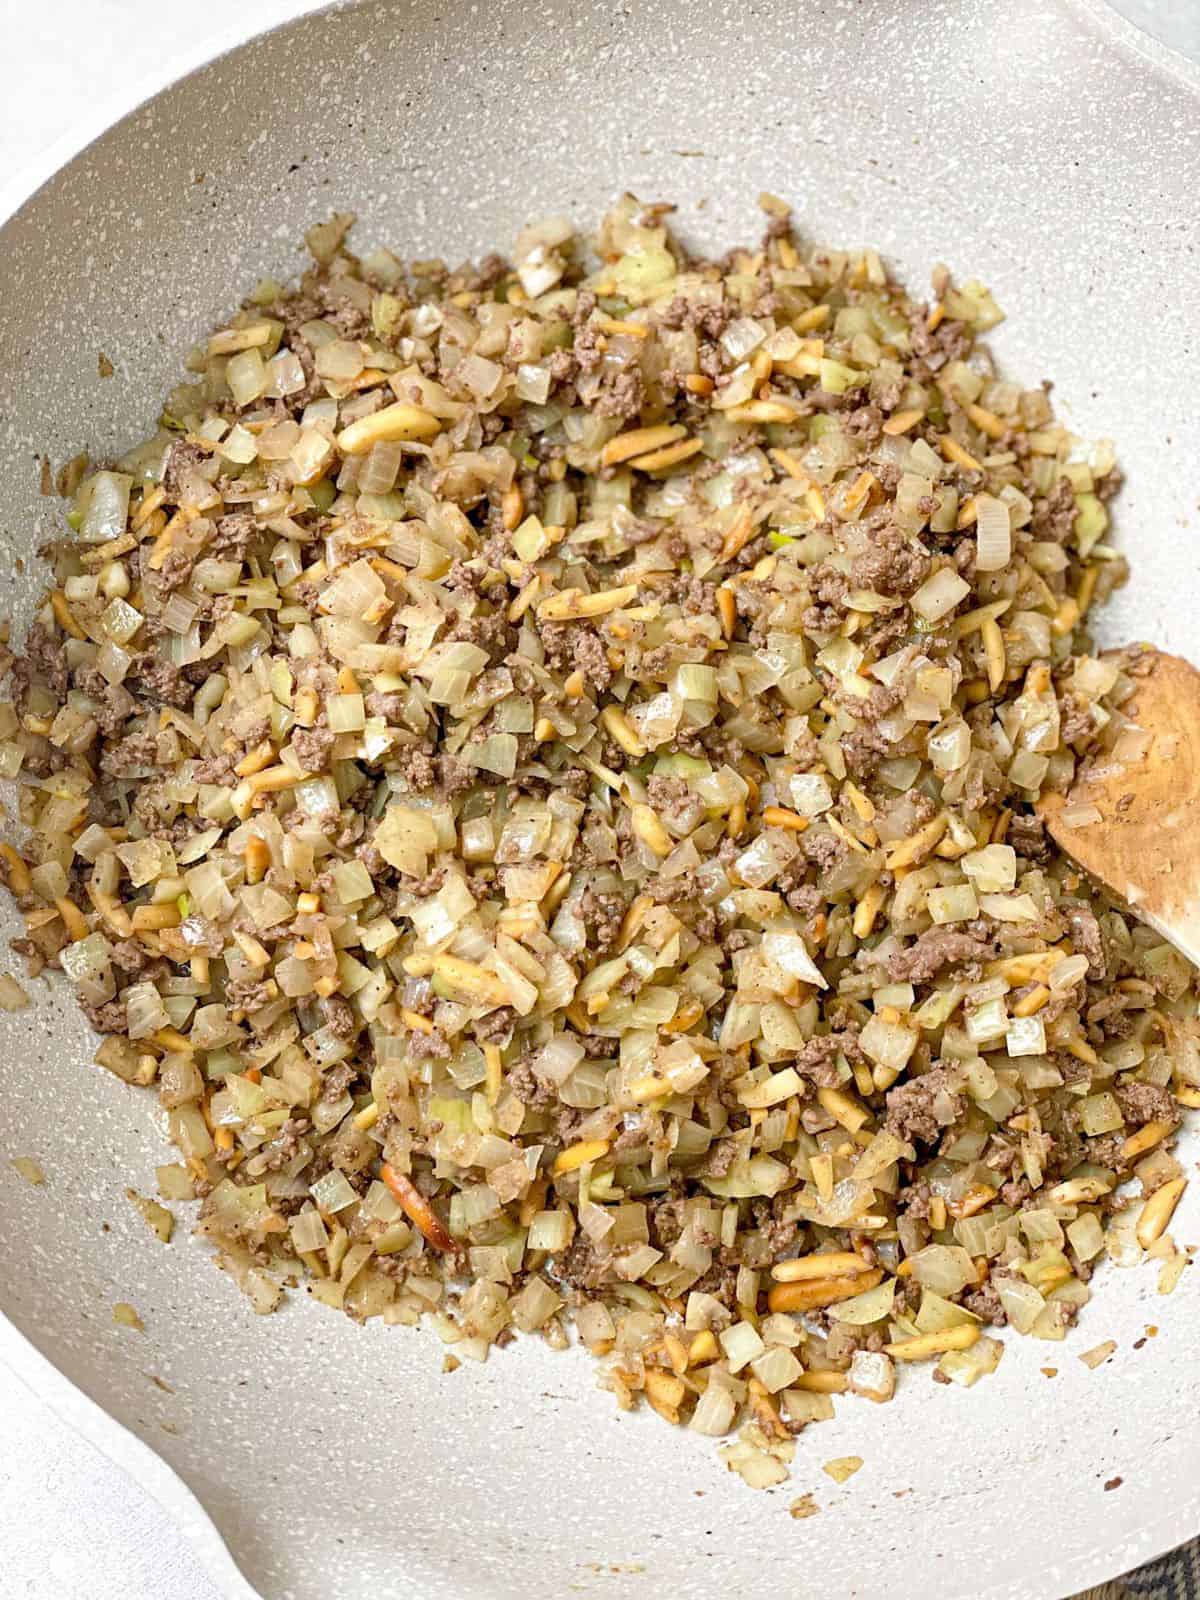 a well-cooked kibbeh filling made up of ground beef, onions, pine nuts, and slivered almonds, and seasoned with seven spices and salt